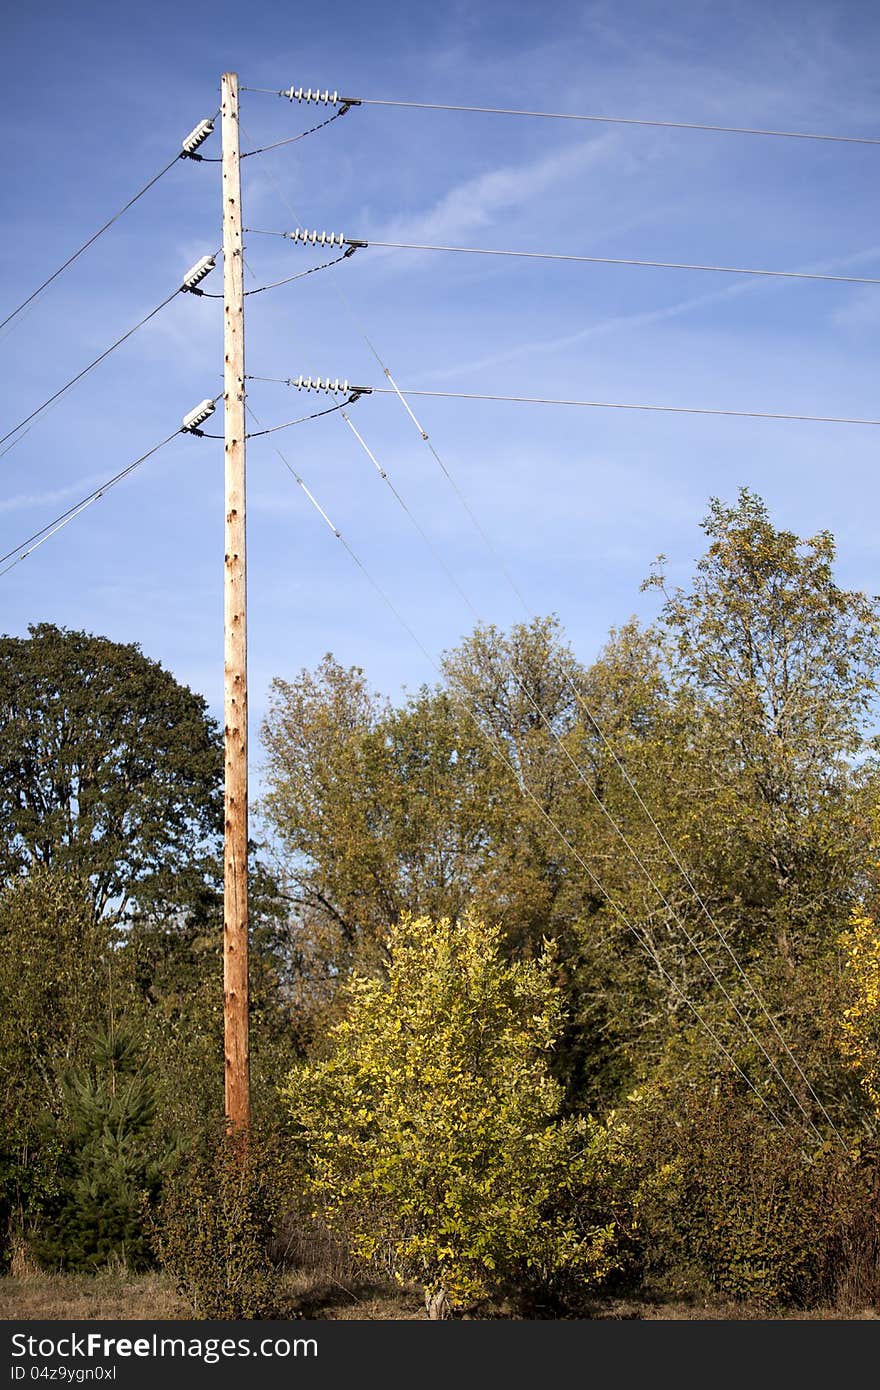 A photo of power lines, trees, and blue sky.